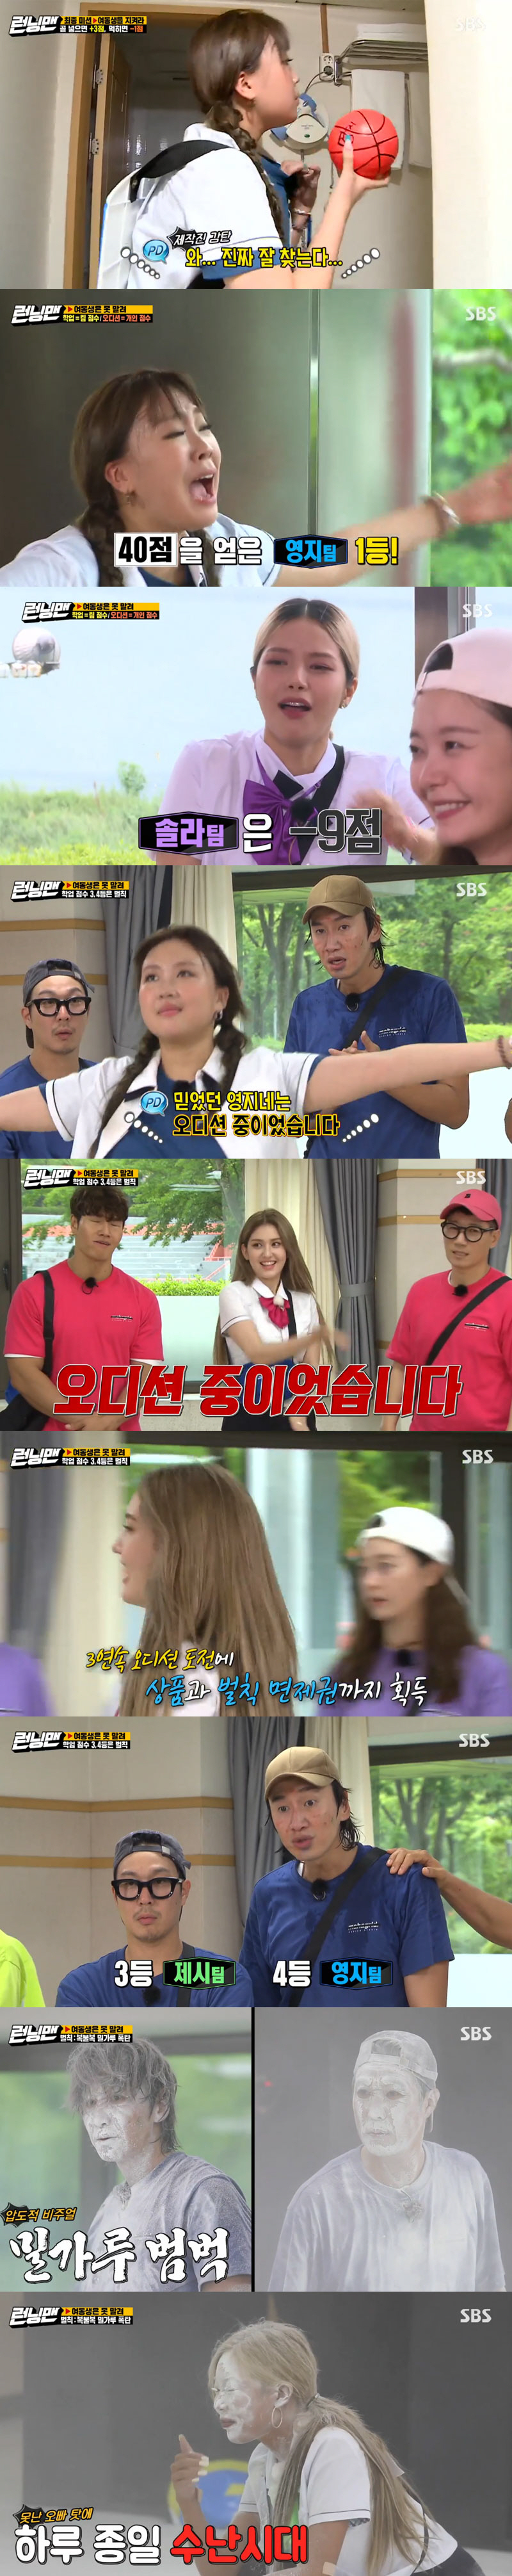 Haha, Lee Kwang-soo and Jessie were penalized for Wheat flour Bomb while the Running Man Solar team took first place.SBS Running Man, which was broadcast on the 2nd, featured younger sister can not be dried, and Jessie, Jeon Sommy, Mama Musola and Lee Young-ji appeared as guests.The members scattered and started shooting. At that time, the members said, My brother, who is about to go to prestigious universities,Find your brother and go to school. The rule of the day is to win the younger master by collecting two members and one younger master guest as a team and making younger master The Graduate.In other words, younger Sister is a race where audition scores are required and members must collect academic scores.The younger brothers selected their sisters and brothers as their sisters before the start of the ceremony. Lee Young-ji appeared first, and Haha and Lee Kwang-soo became brothers.Jessie became brothers with Yoo Jae-Suk and Yang Se-chan, while Jeon So-minn was brothers with Kim Jong-kook and Ji Suk-jin, and Sola with Song Ji-hyo and Jeon So-minnn.Afterwards, younger sisters tricked the members to I am a brother to get audition scores.At that time, after Solar, Jeon Sommy gathered the team and arrived at the opening place first, earning 40 points and 30 points respectively.Jessie and Lee Young-ji then arrived at the opening place with third and fourth places, earning 20 points and 10 points.After each mission, the younger room is conducted with the score obtained, and younger masters enter their rooms and write performance evaluations or shoot audition videos.If you are looking for a team score, academic score, younger masters will perform performance evaluation Choices, and if you are looking for an individual score, audition score, younger masters will audition.However, if your sister does not believe in younger Sister, if you open the door of the room and check the surprise, and if you were shooting audition videos, the score obtained from the mission will be the Central Provident Fund with the team score.However, if you were in the process of writing a performance evaluation, all the scores obtained from the mission will disappear.Yoo Jae-Suk and Yang Se-chan, Song Ji-hyo and Jeon So-minn scored 50 points for Choices, Jessie and Sola, who were in the performance evaluation, and Central Provident Fund.On the other hand, Haha and Lee Kwang-soo, Ji Suk-jin and Kim Jong-kook did not believe it, and Lee Young-ji and Jeon So-minn, who were auditioning, were embarrassed.As a result of the Nothing to say mission, the first solar team won 50 points, the second sommy team got 40 points, the third place team 30 points, and the fourth Jessie team got 20 points.The first place in the study was Solar Team, with all the members failing, and the second place was Jessie Team and the former Sommy Team.The final mission is a game that wins if you score a lot of goals in the opponents goal in the 10th minute of the second half.In the first half, only younger Sister, in the second half, younger Sister and one of the brothers are in the net.You have to find a hidden basketball and write your team younger master name to score.In the first half of the game, he scored 26 points for the Gnostic Team, 14 for the Somi Team, 8 for the Jessie Team, and 10 for the Solar Team.The second place was the Somi team, the third place was the Jessie team, and the fourth sola team got -9 points.As a result of the last younger sisters room, Jeon So-min won the product and penalty exemption for the third consecutive audition challenge.He won the award for Lee Young-ji, who won the audition score second, and the best The Graduate was the Solar Team. The second was the former Sommy Team, the third was Jessie Team, and the fourth was the Gnostic Team.Haha and Lee Kwang-soo, except for the manor, won the Wheat flour Bomb penalty.Jessies team also carried out penalties, and Jessie was hit by Wheat flour Bomb alone.